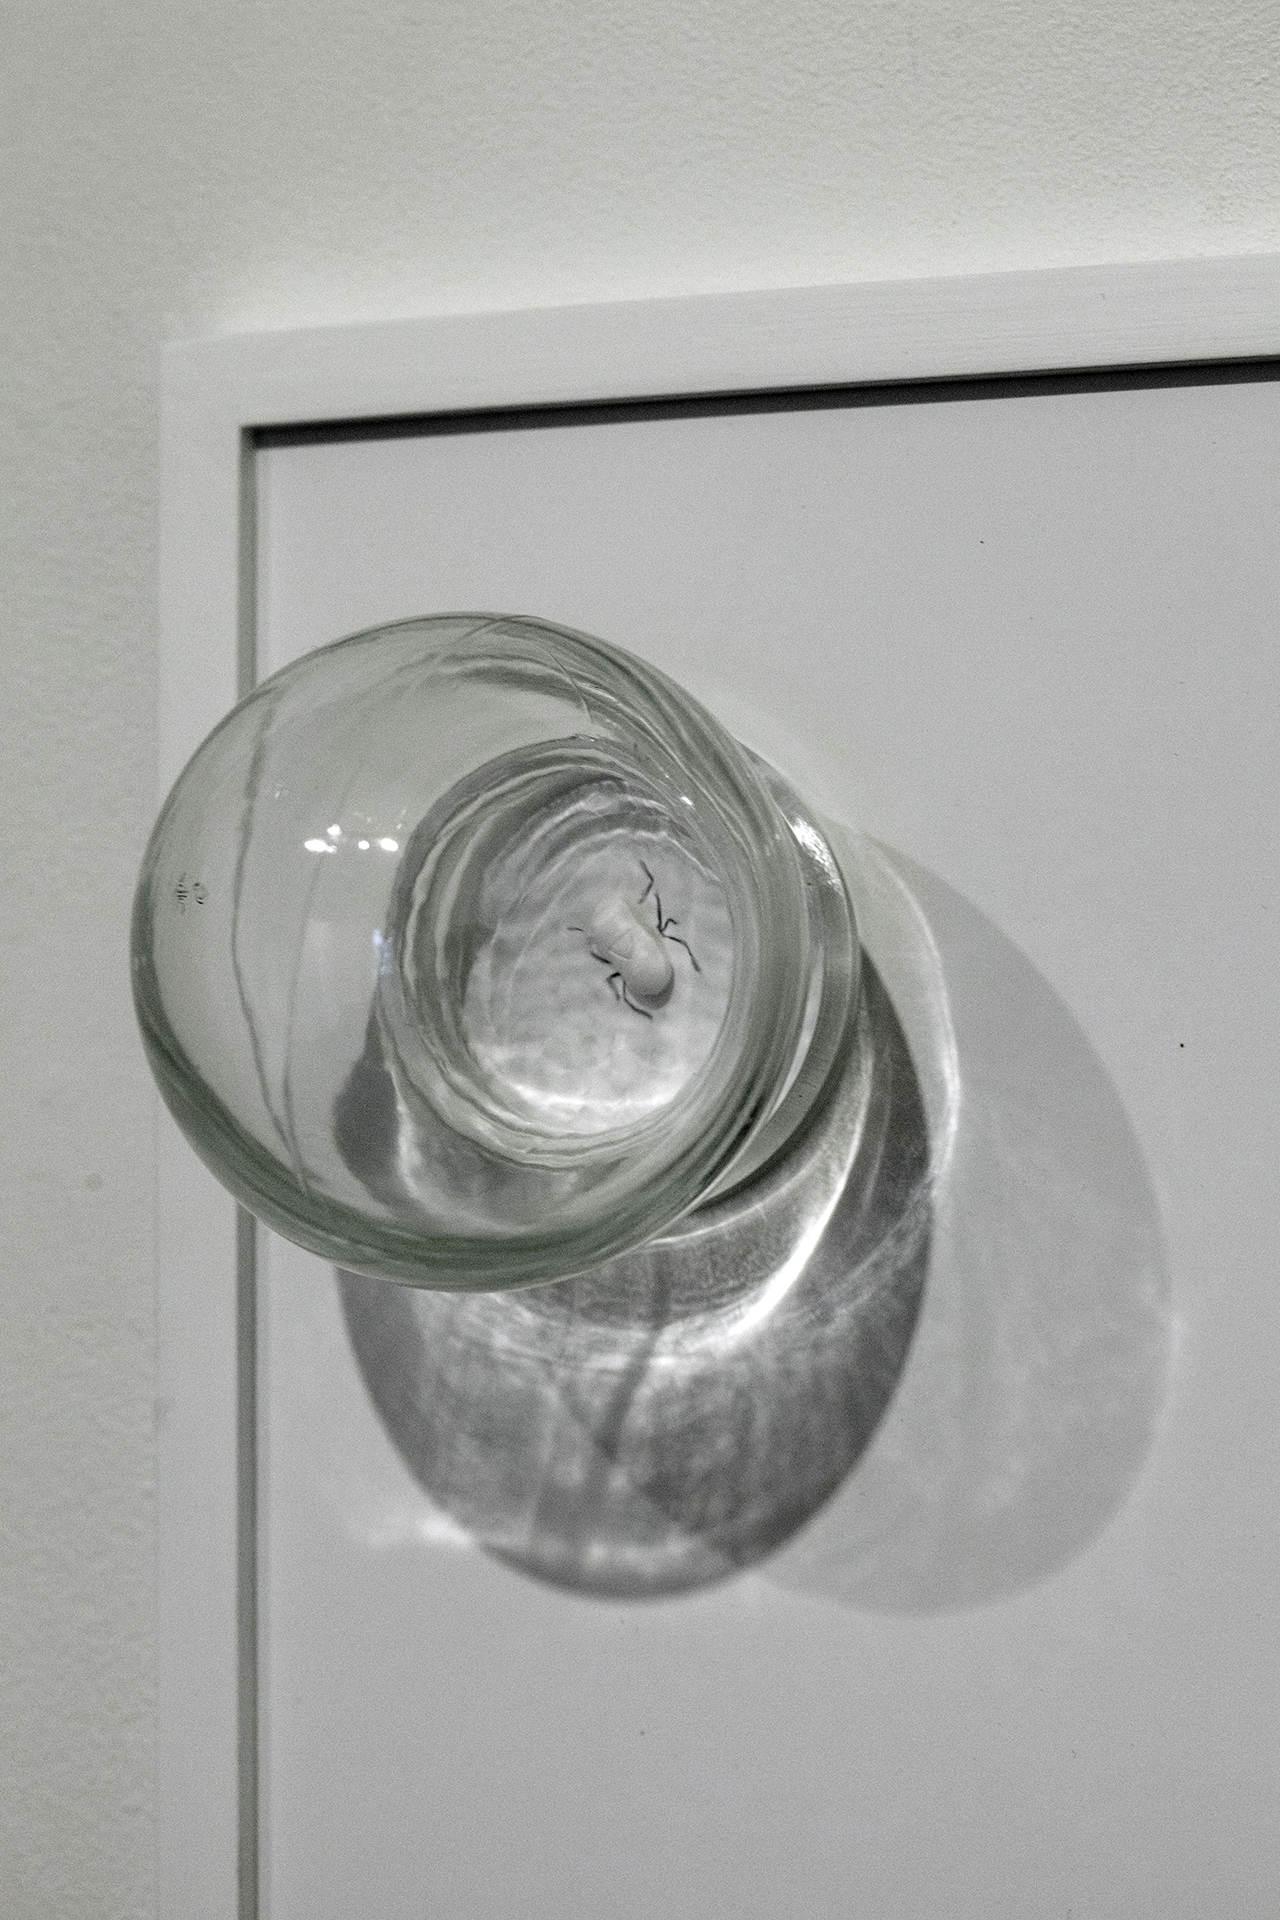 Maryam Jafri. ANT (Automatic Negative Thought) (2017). 12"x 5"x 9". Inkjet on paper, graphite, pill, cupping glass. Detail